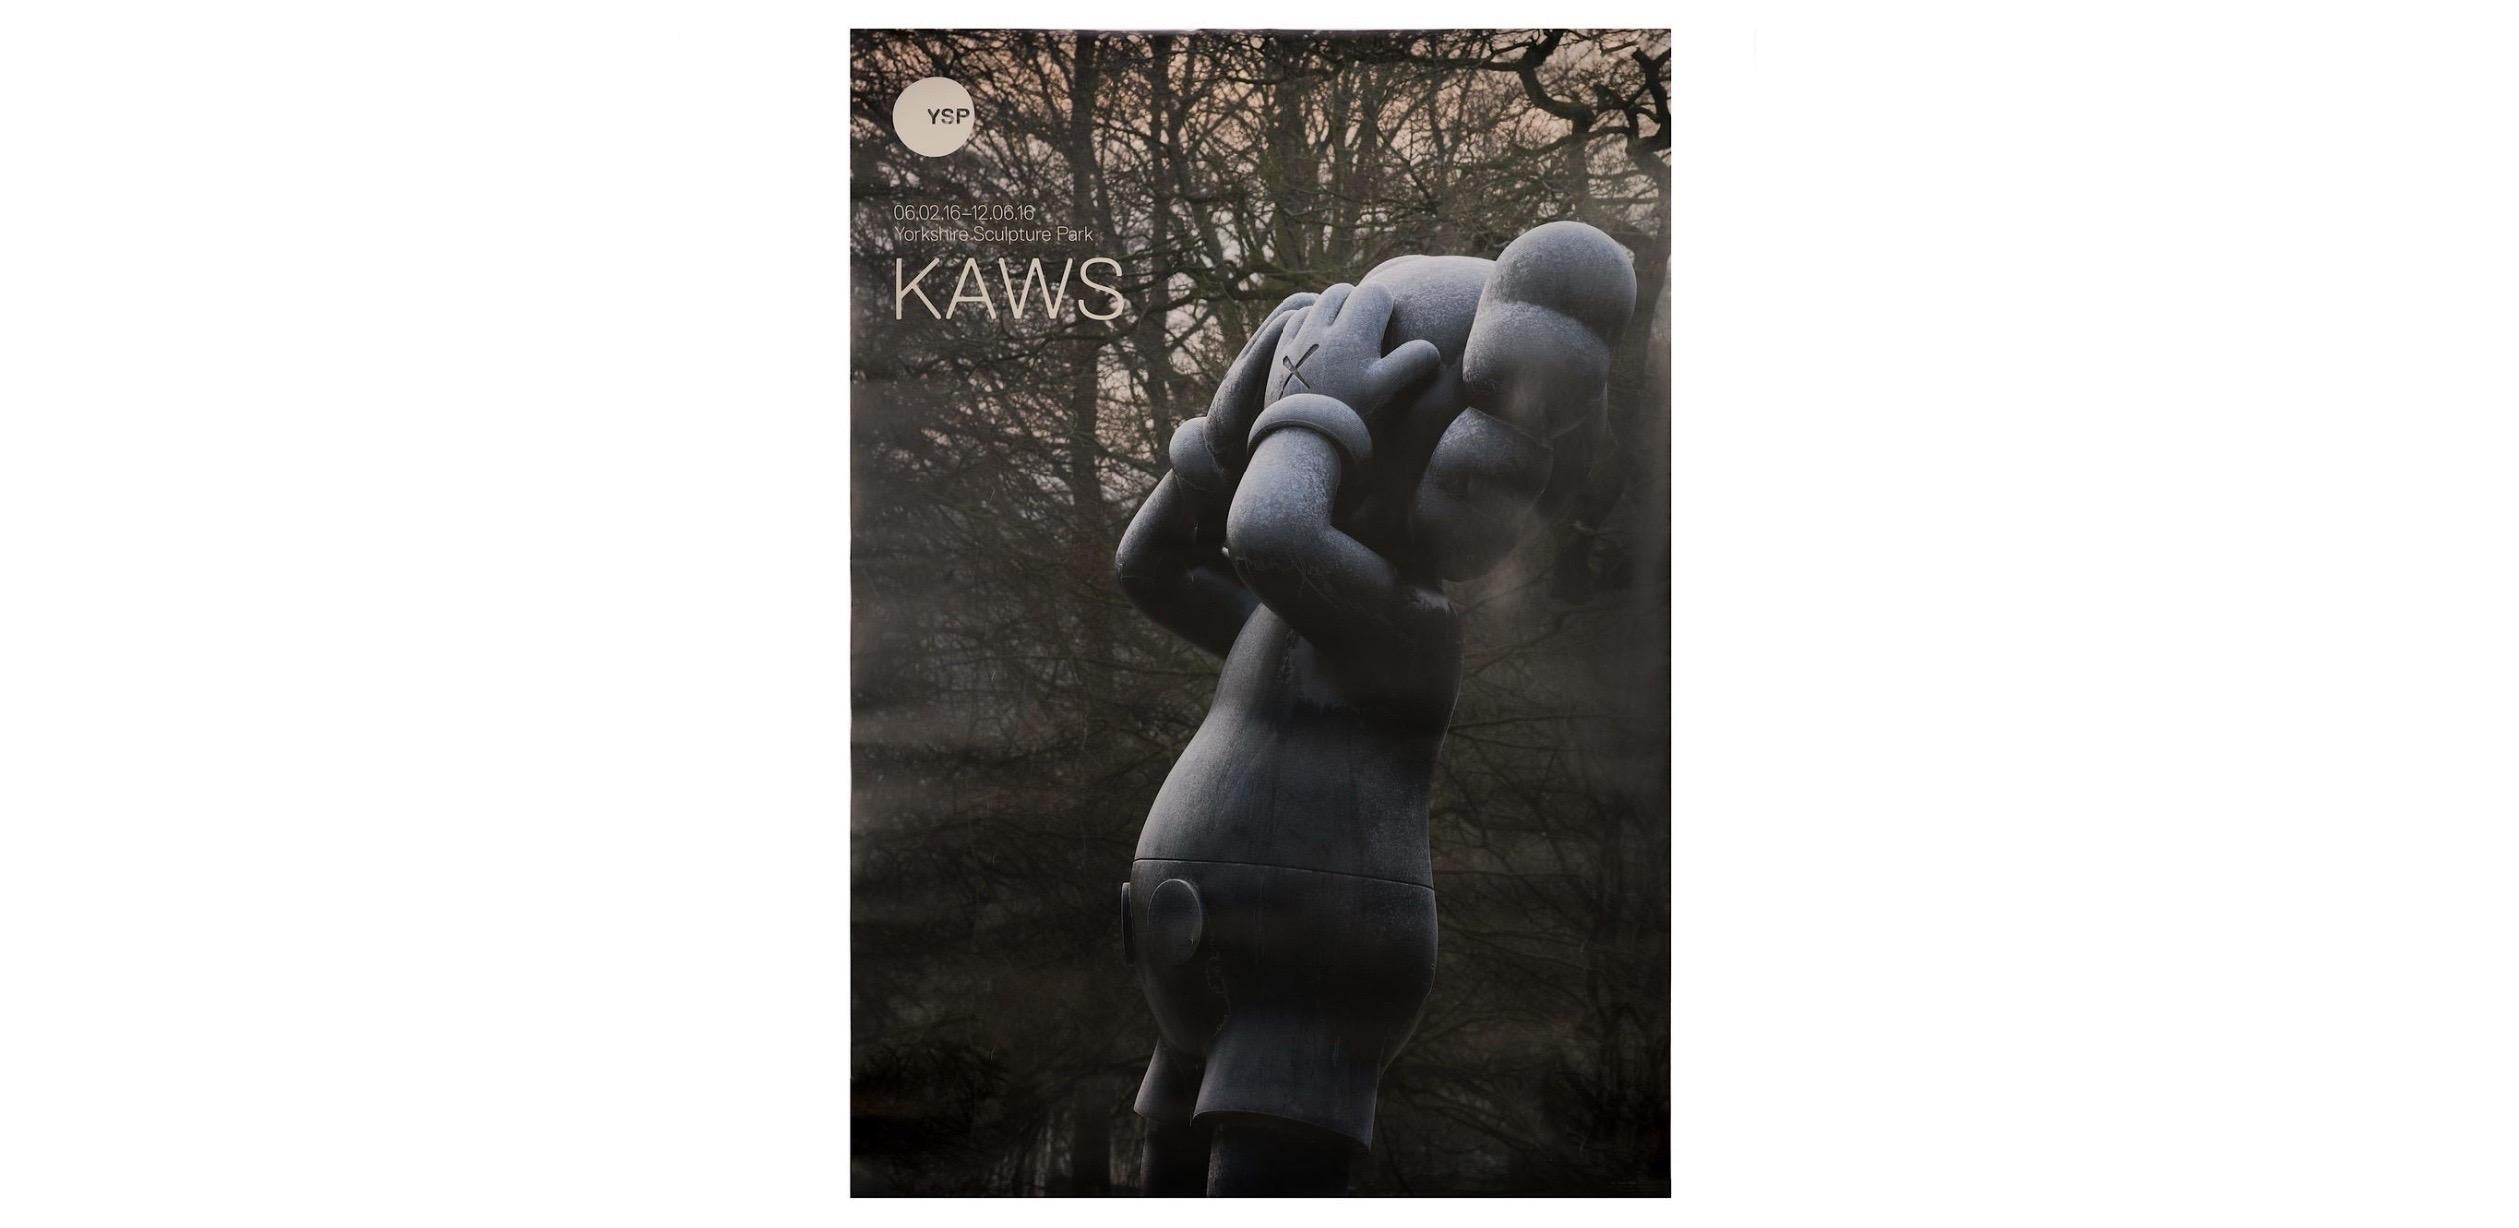 KAWS - At This Time


Kaws YSP Sculpture 2016 Exhibition Poster

Original 2016 Exhibition Poster

Limited Edition

Heavyweight Gauge Paper

Perfect Condition

59 x 83 cm 



This beautifully framed 2016 Yorkshire Sculpture Park poster features a